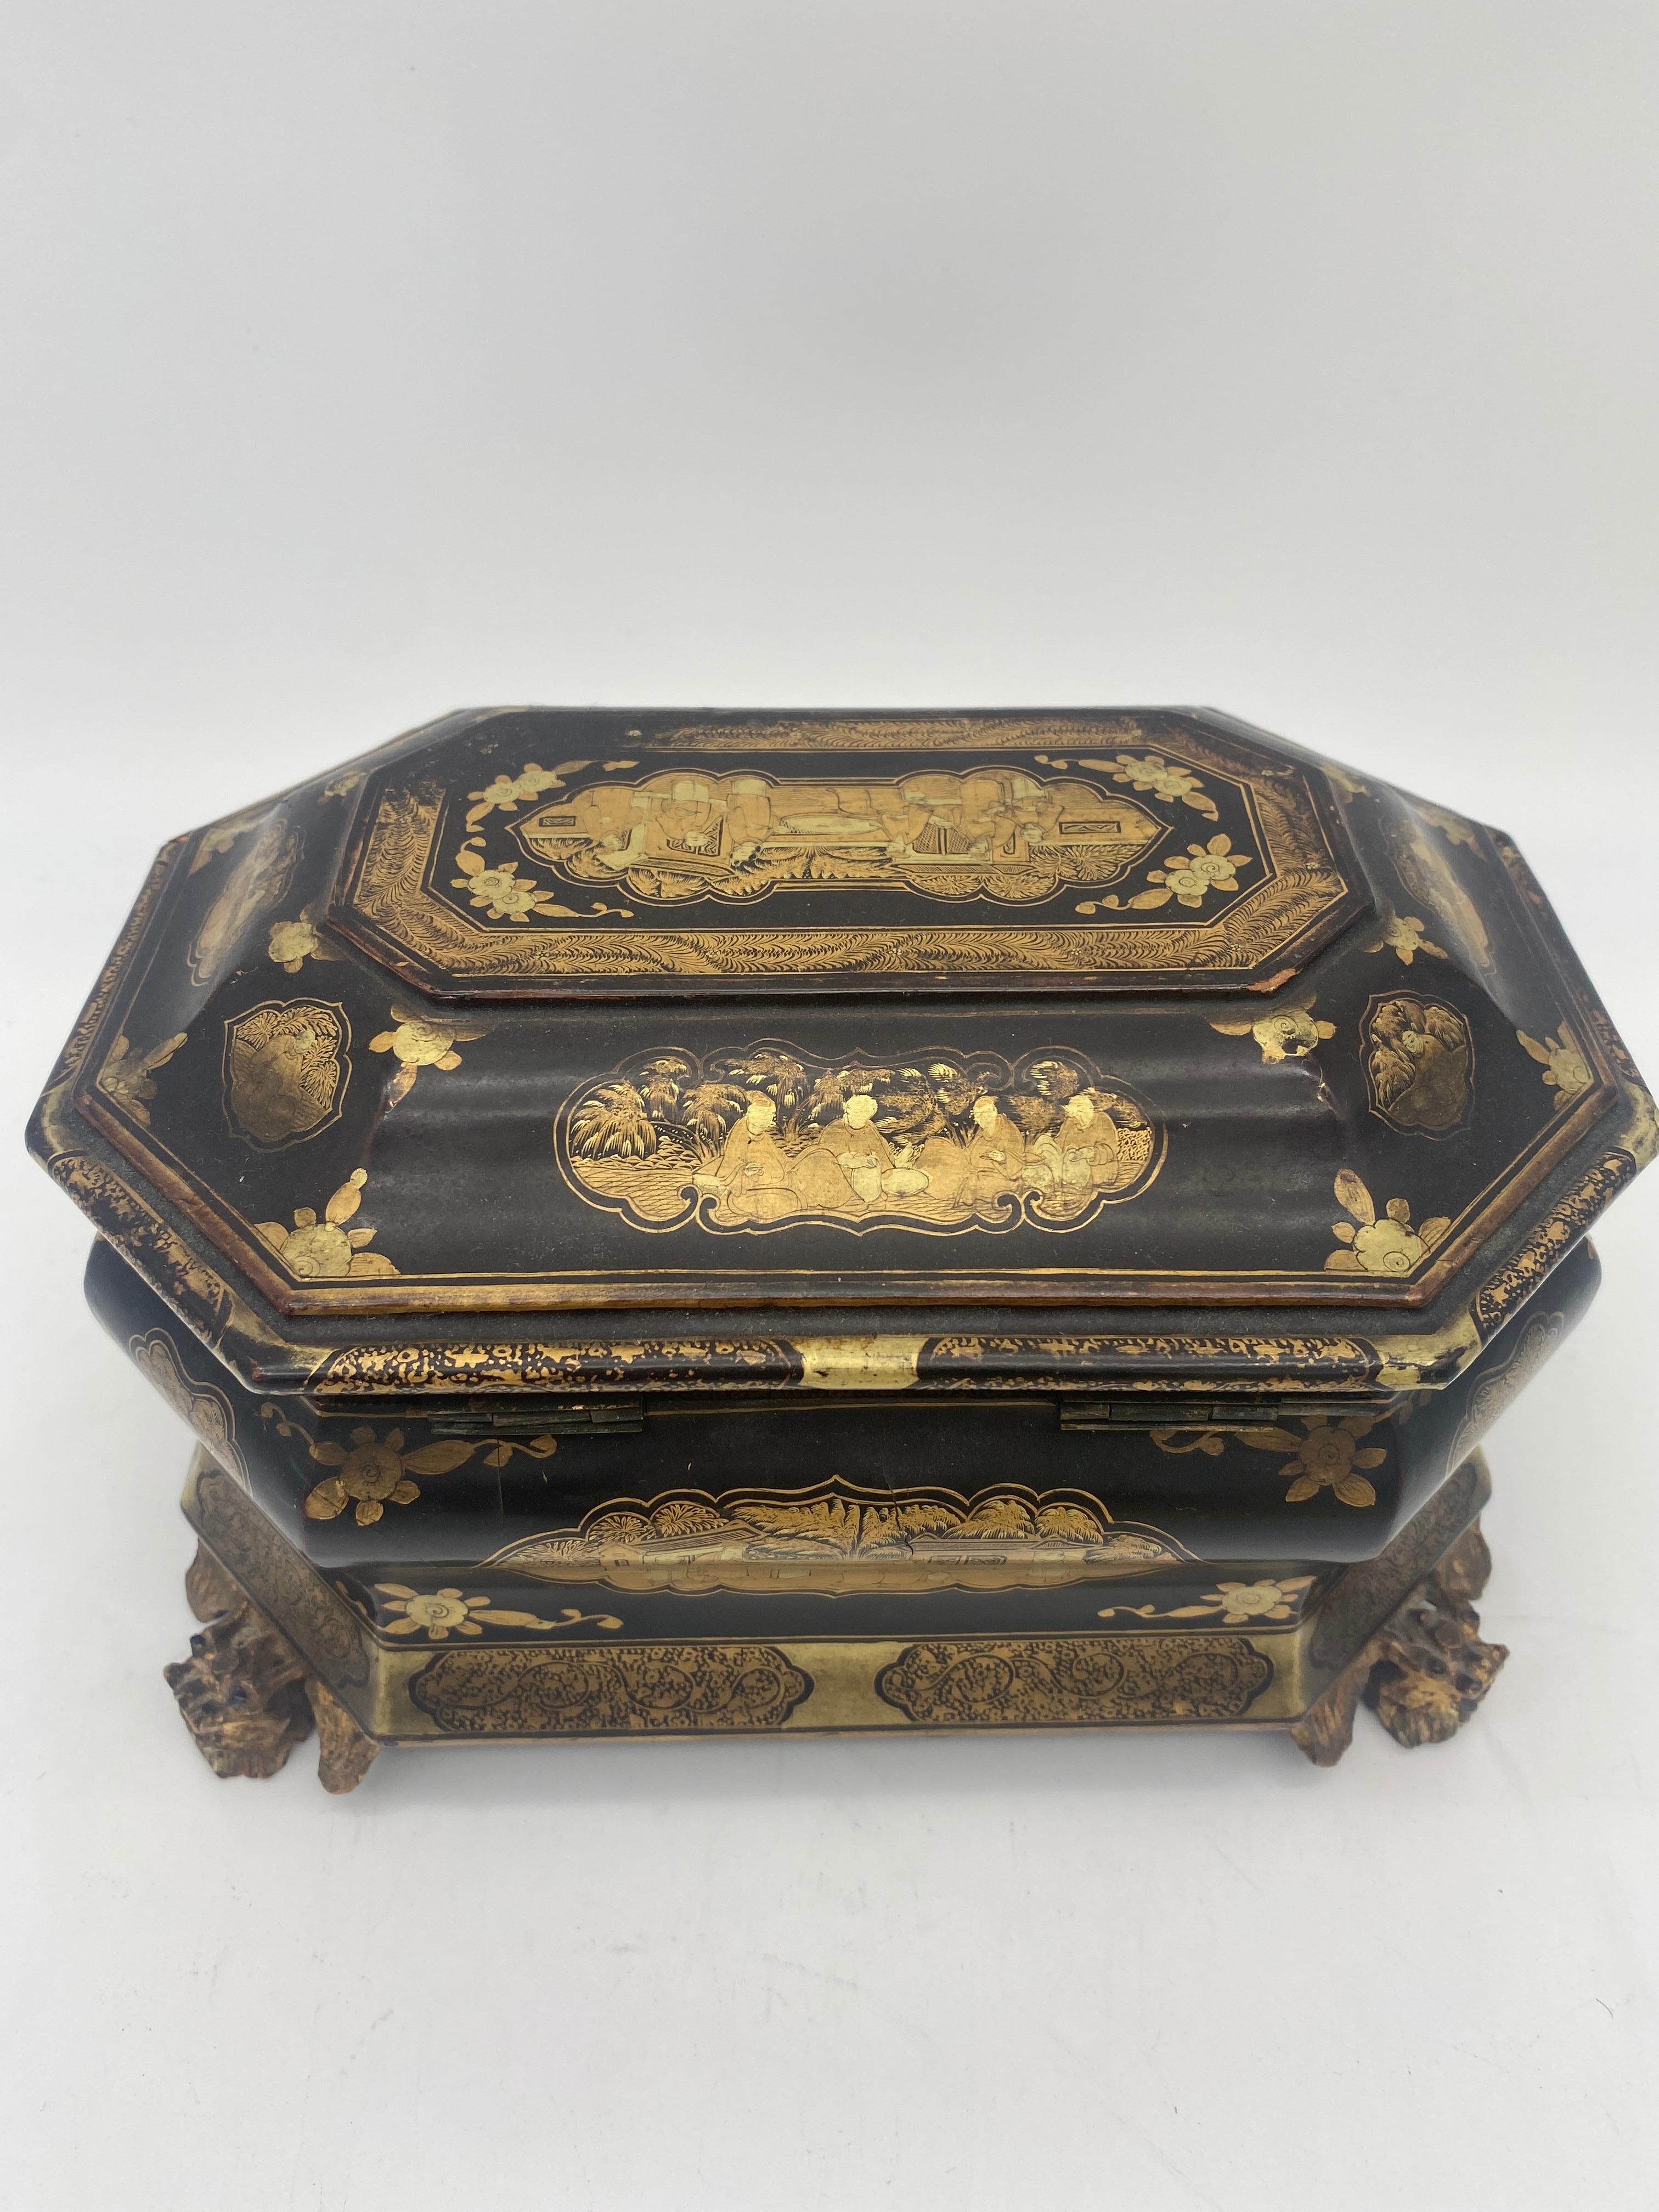 19th Century Antique Gilt Lacquer Chinese Tea Caddy For Sale 3